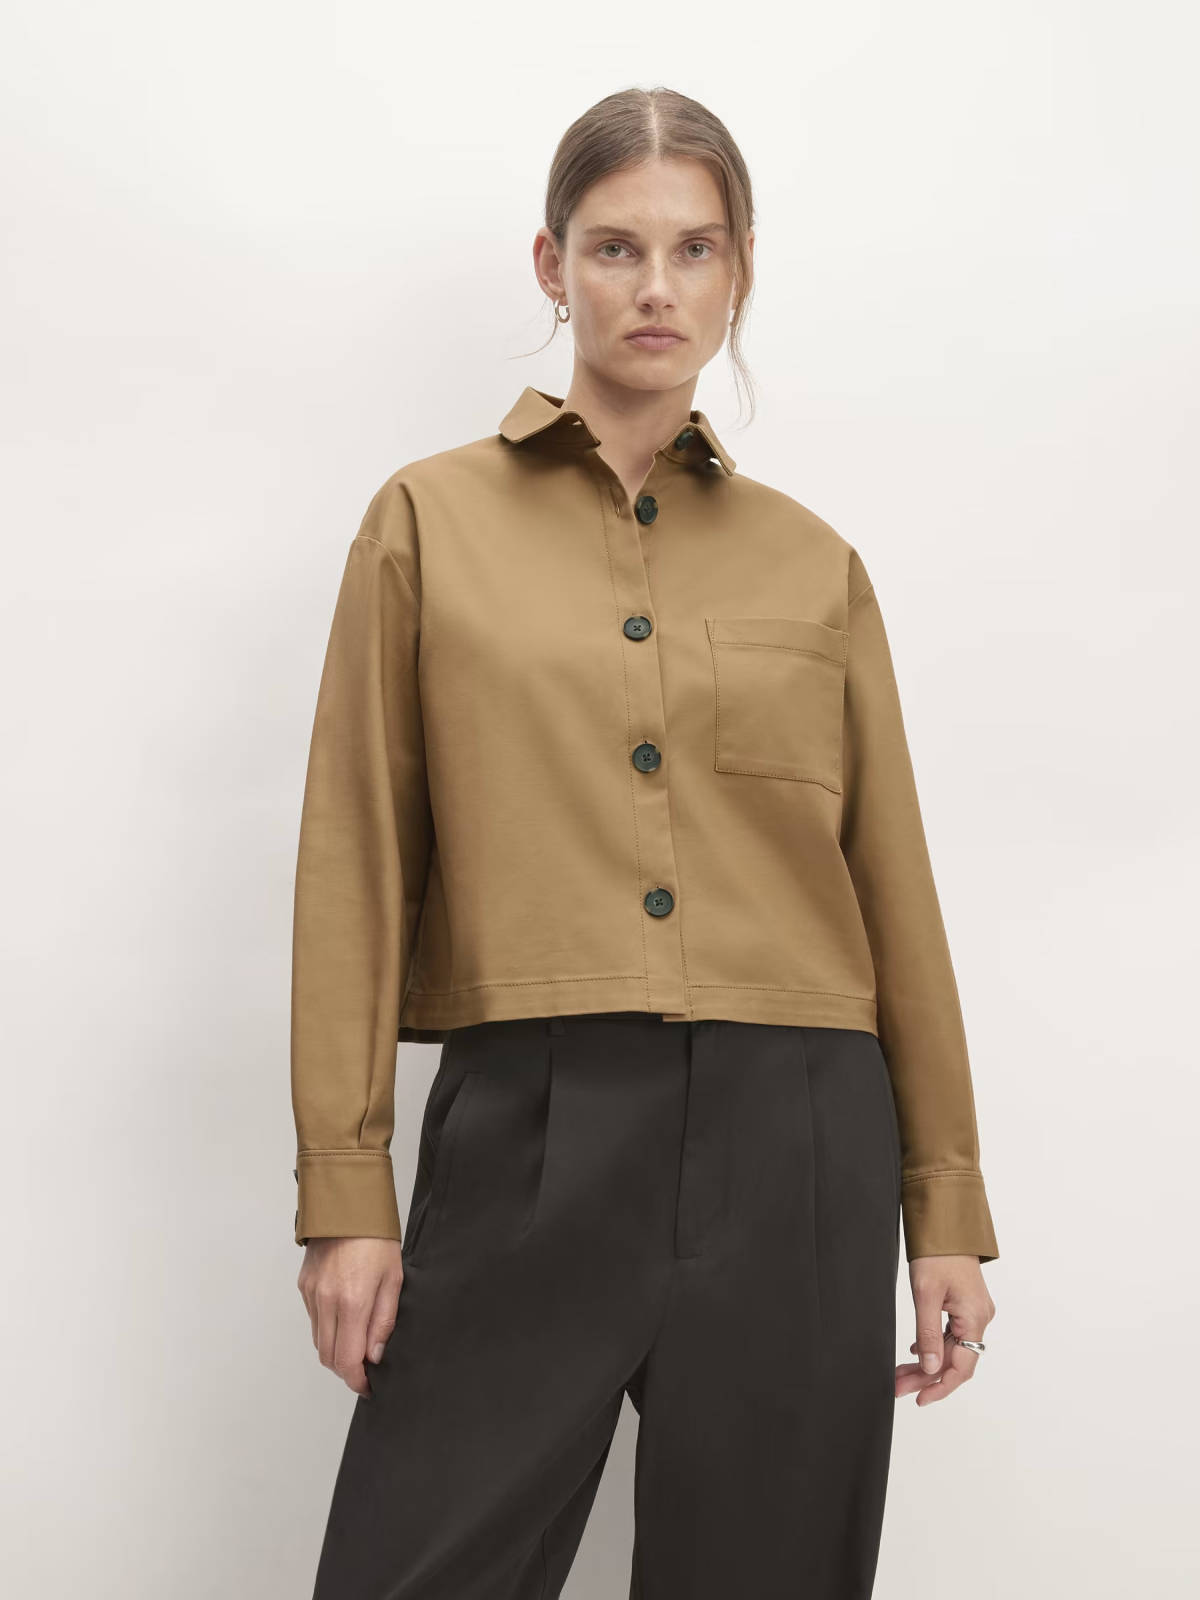 The Structured Cotton Shirt